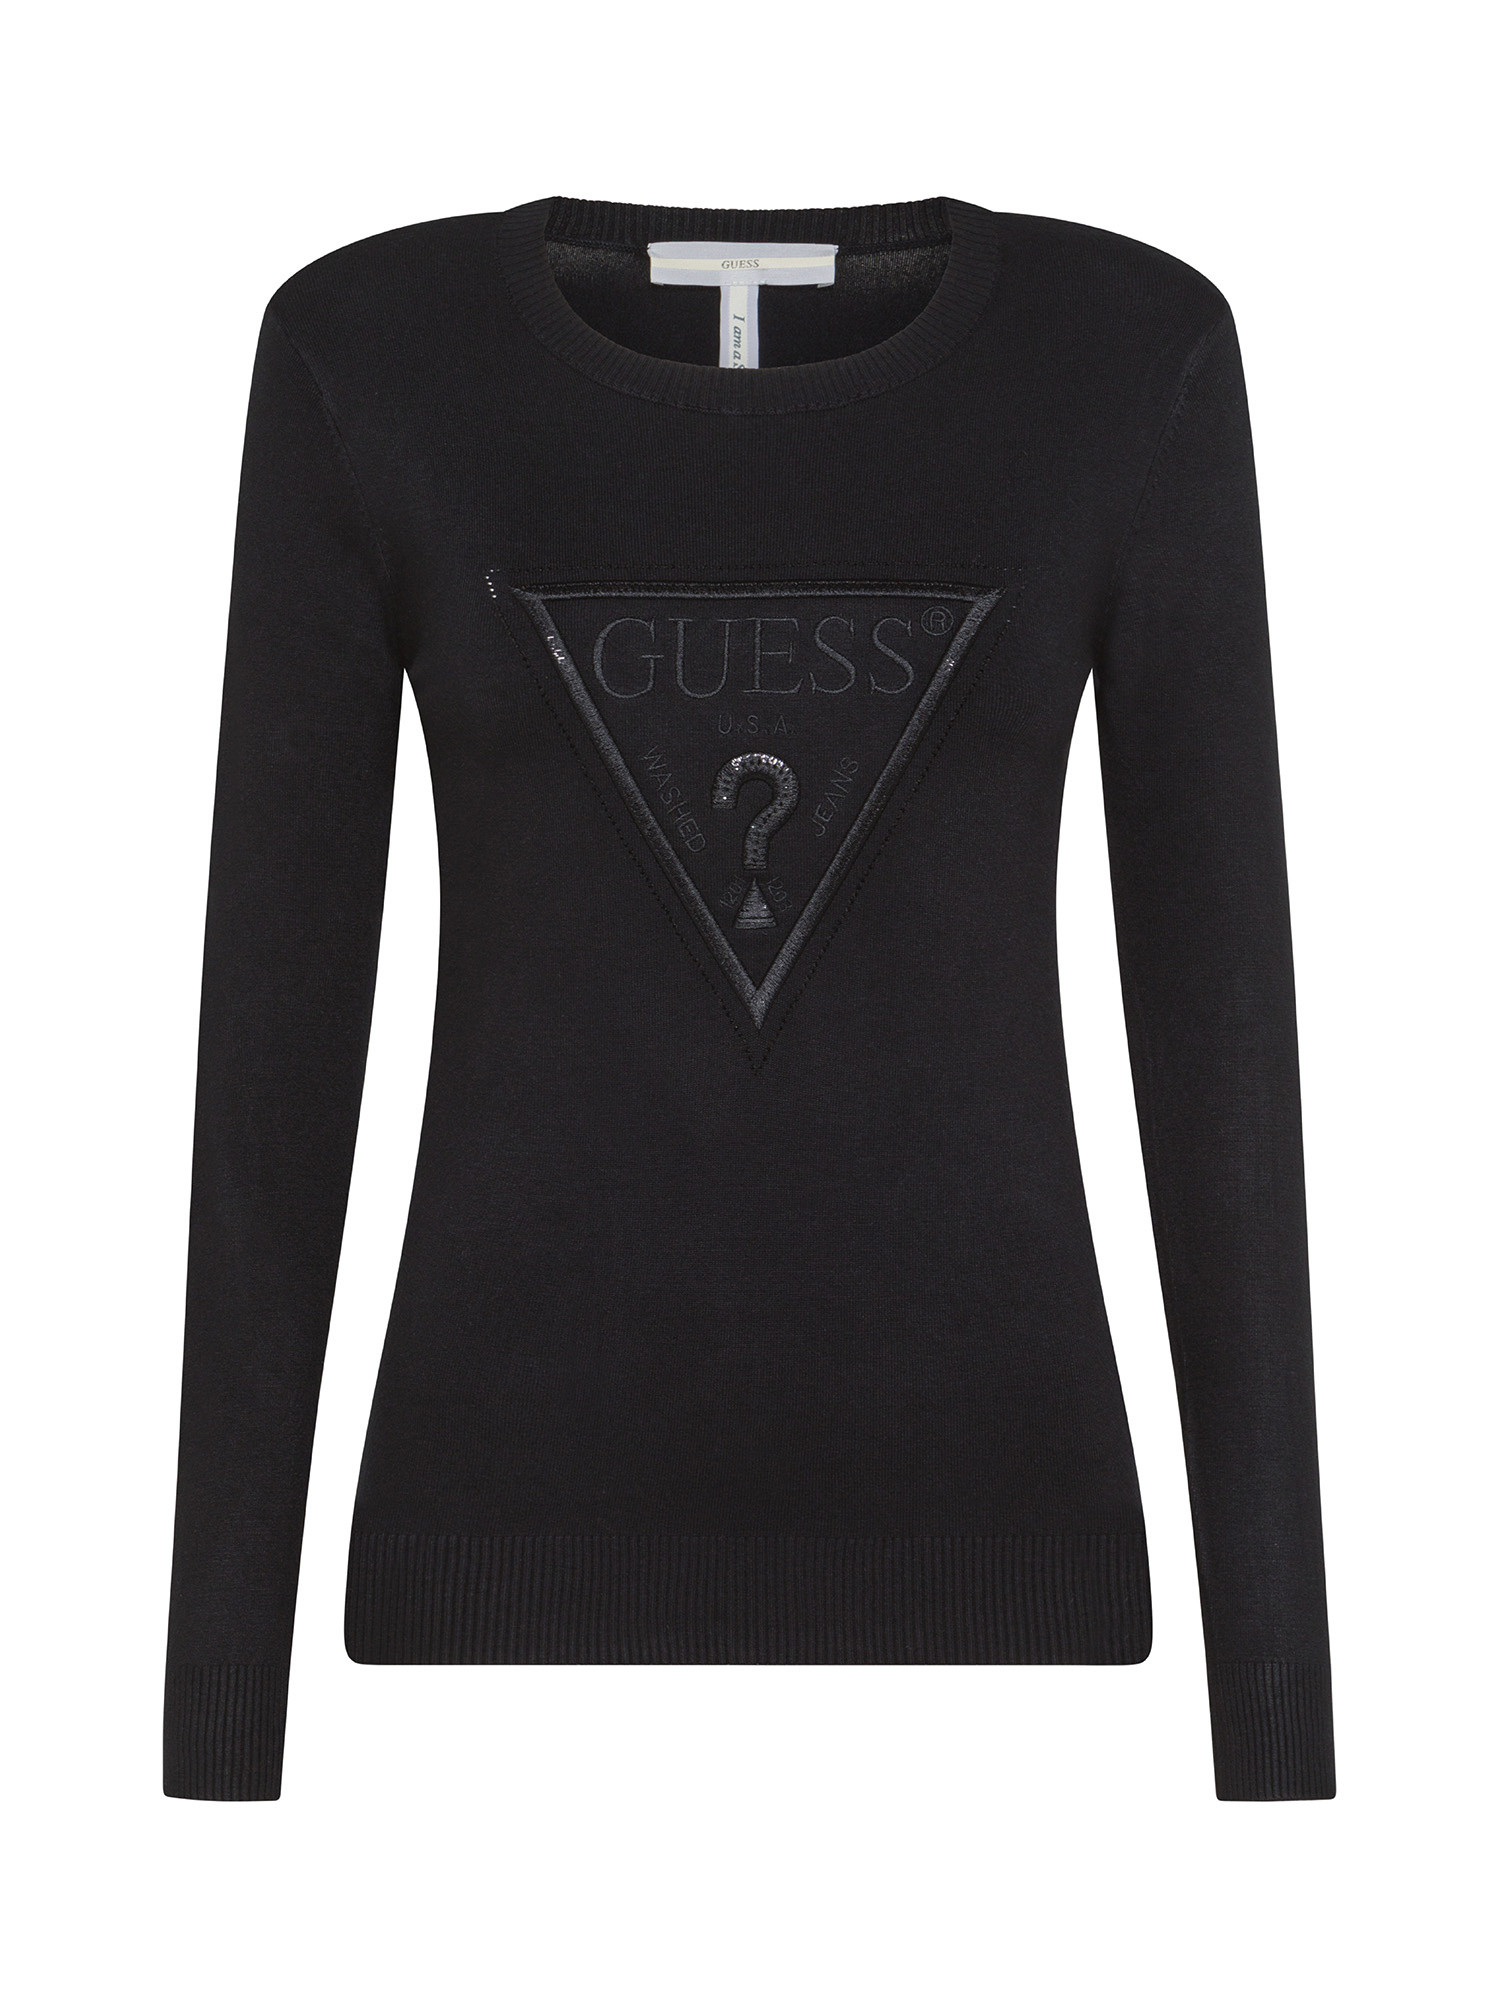 Guess - Slim fit logo sweater with rhinestones, Black, large image number 0